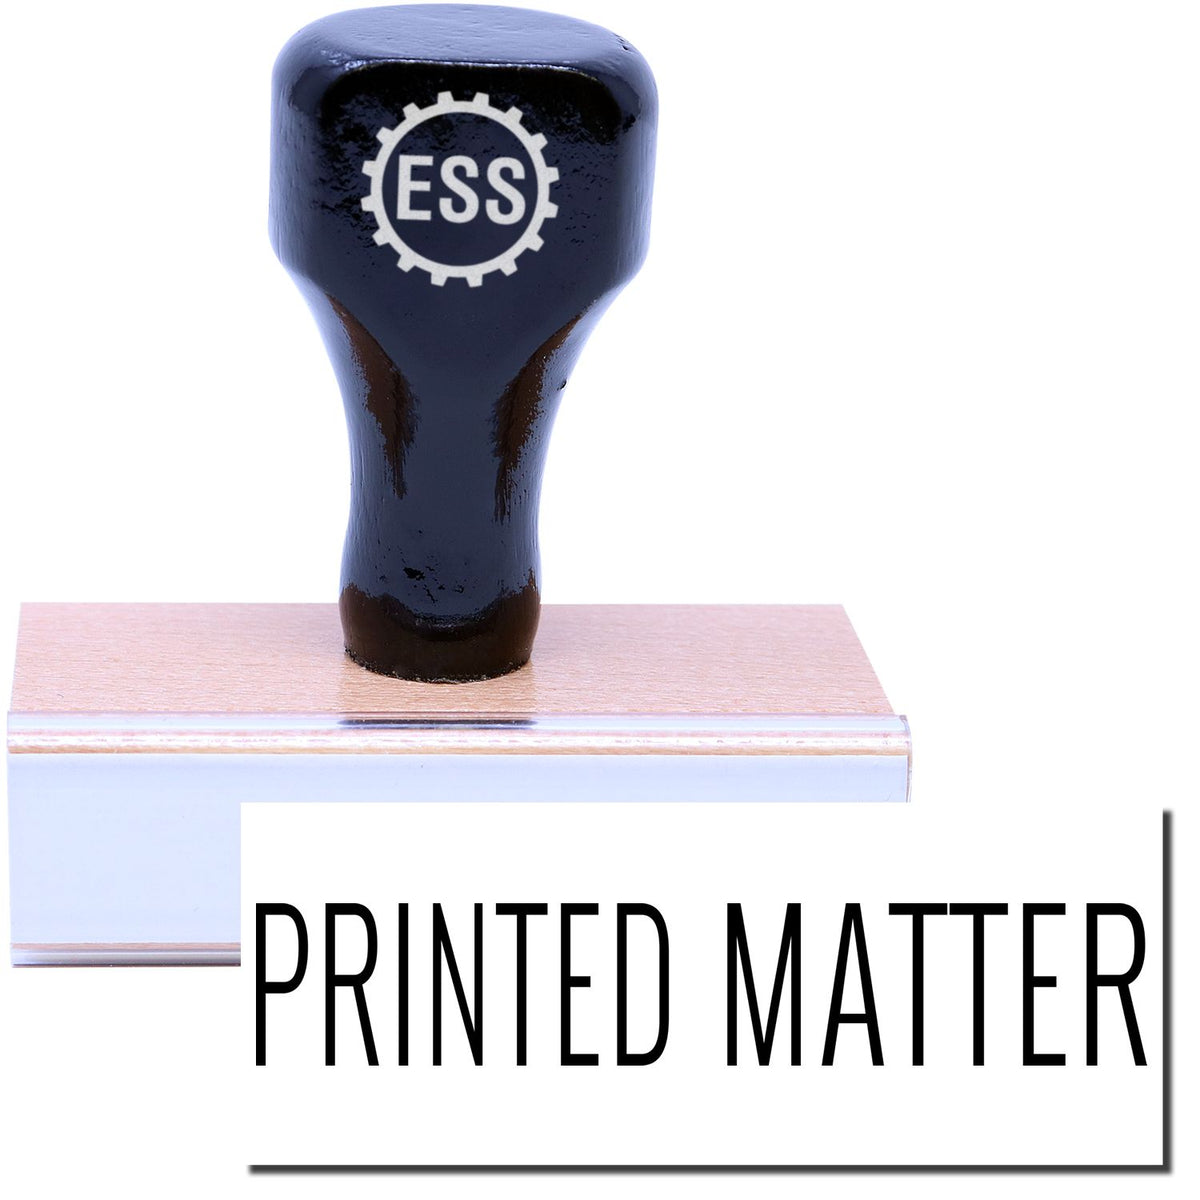 A stock office rubber stamp with a stamped image showing how the text &quot;PRINTED MATTER&quot; in a large font is displayed after stamping.